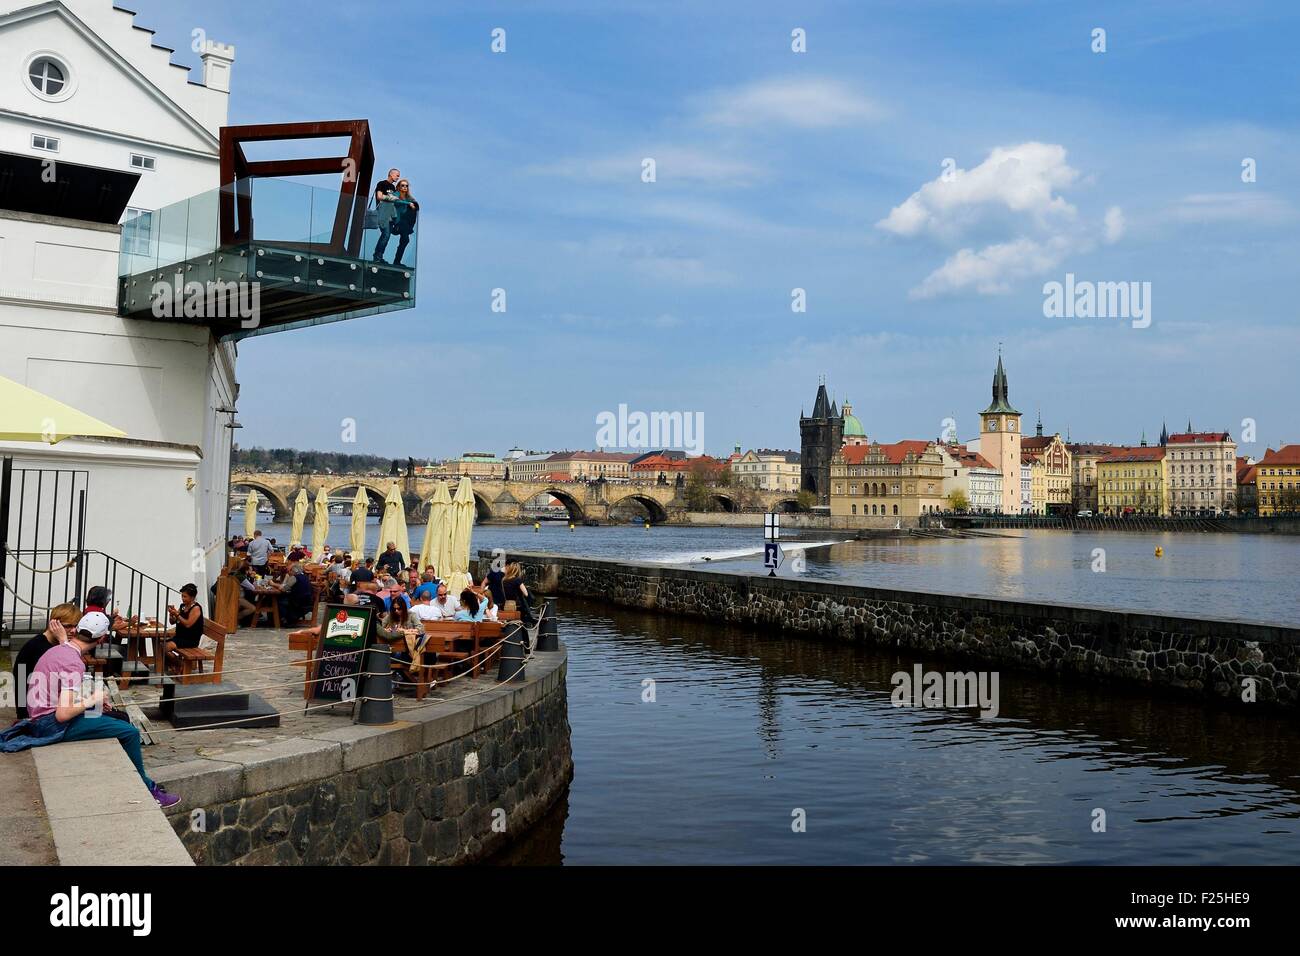 Czech Republic, Prague, Kampa district, Kampa museum private foundation dedicated to modern and contemporary art, the Charles Bridge over the Vltava River in the background Stock Photo